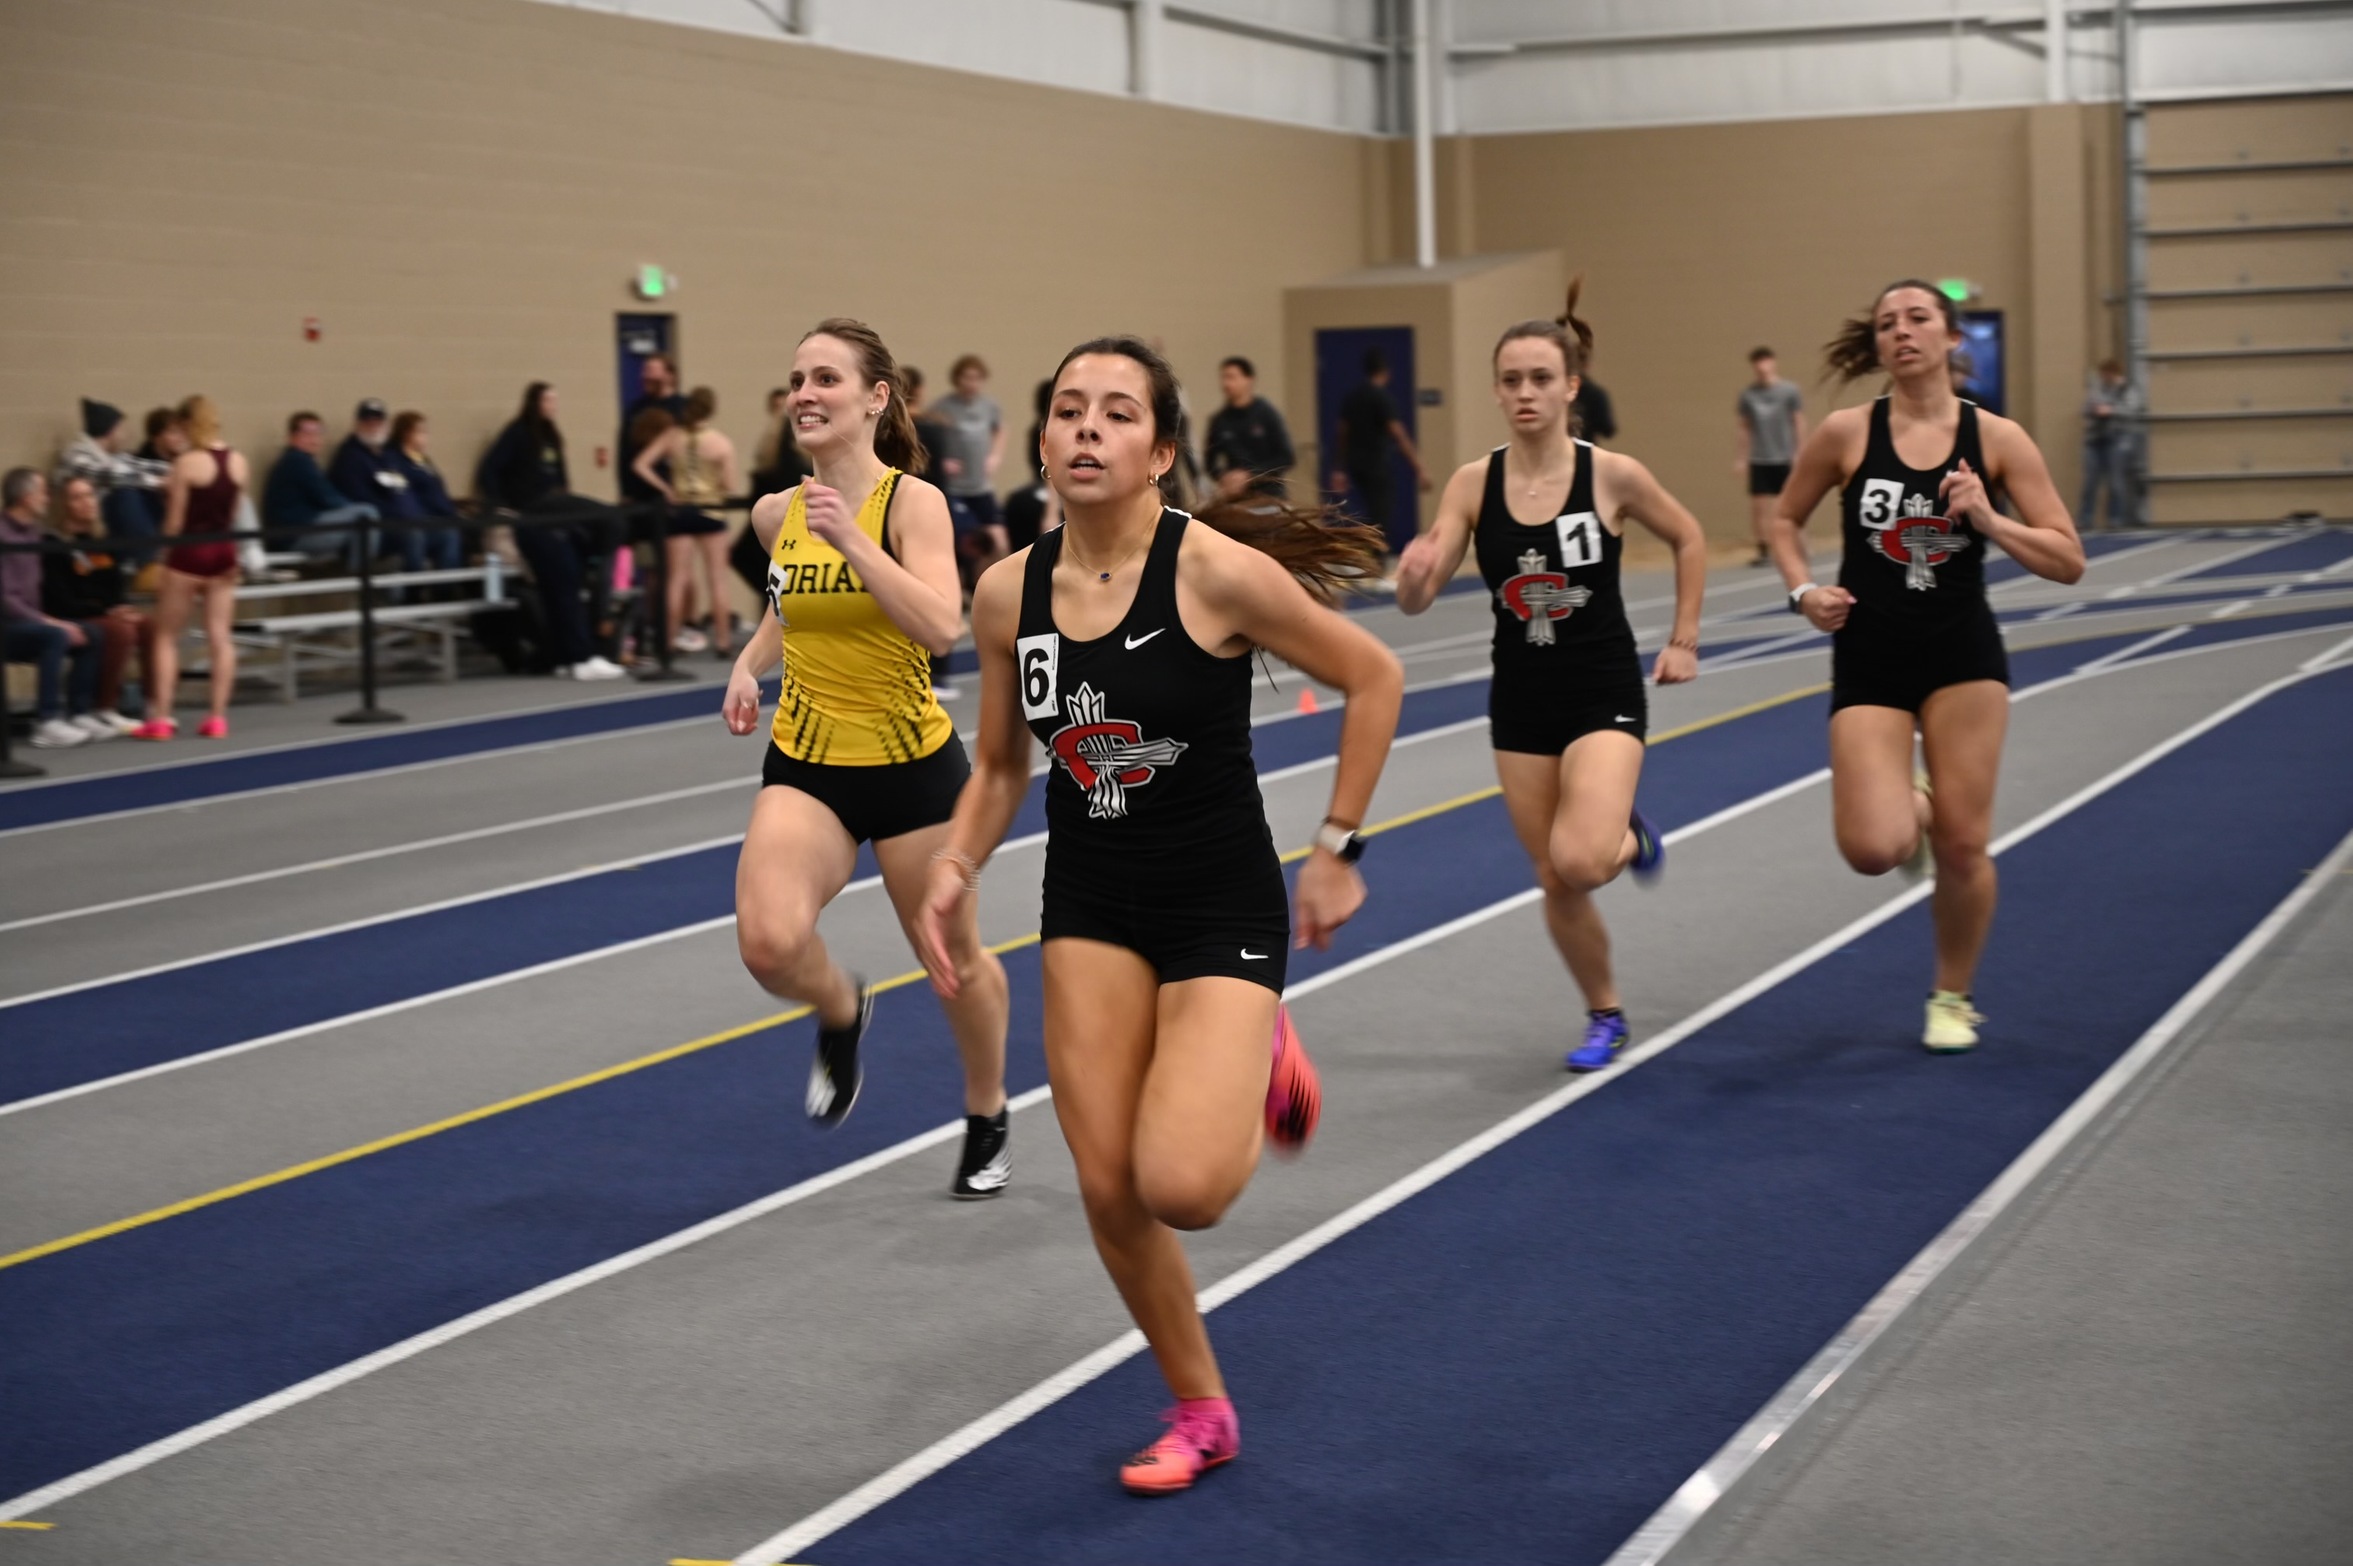 Women's Track & Field competes at Mrs. G Invitational; Ullenbruch qualifies for NCCAA Nationals